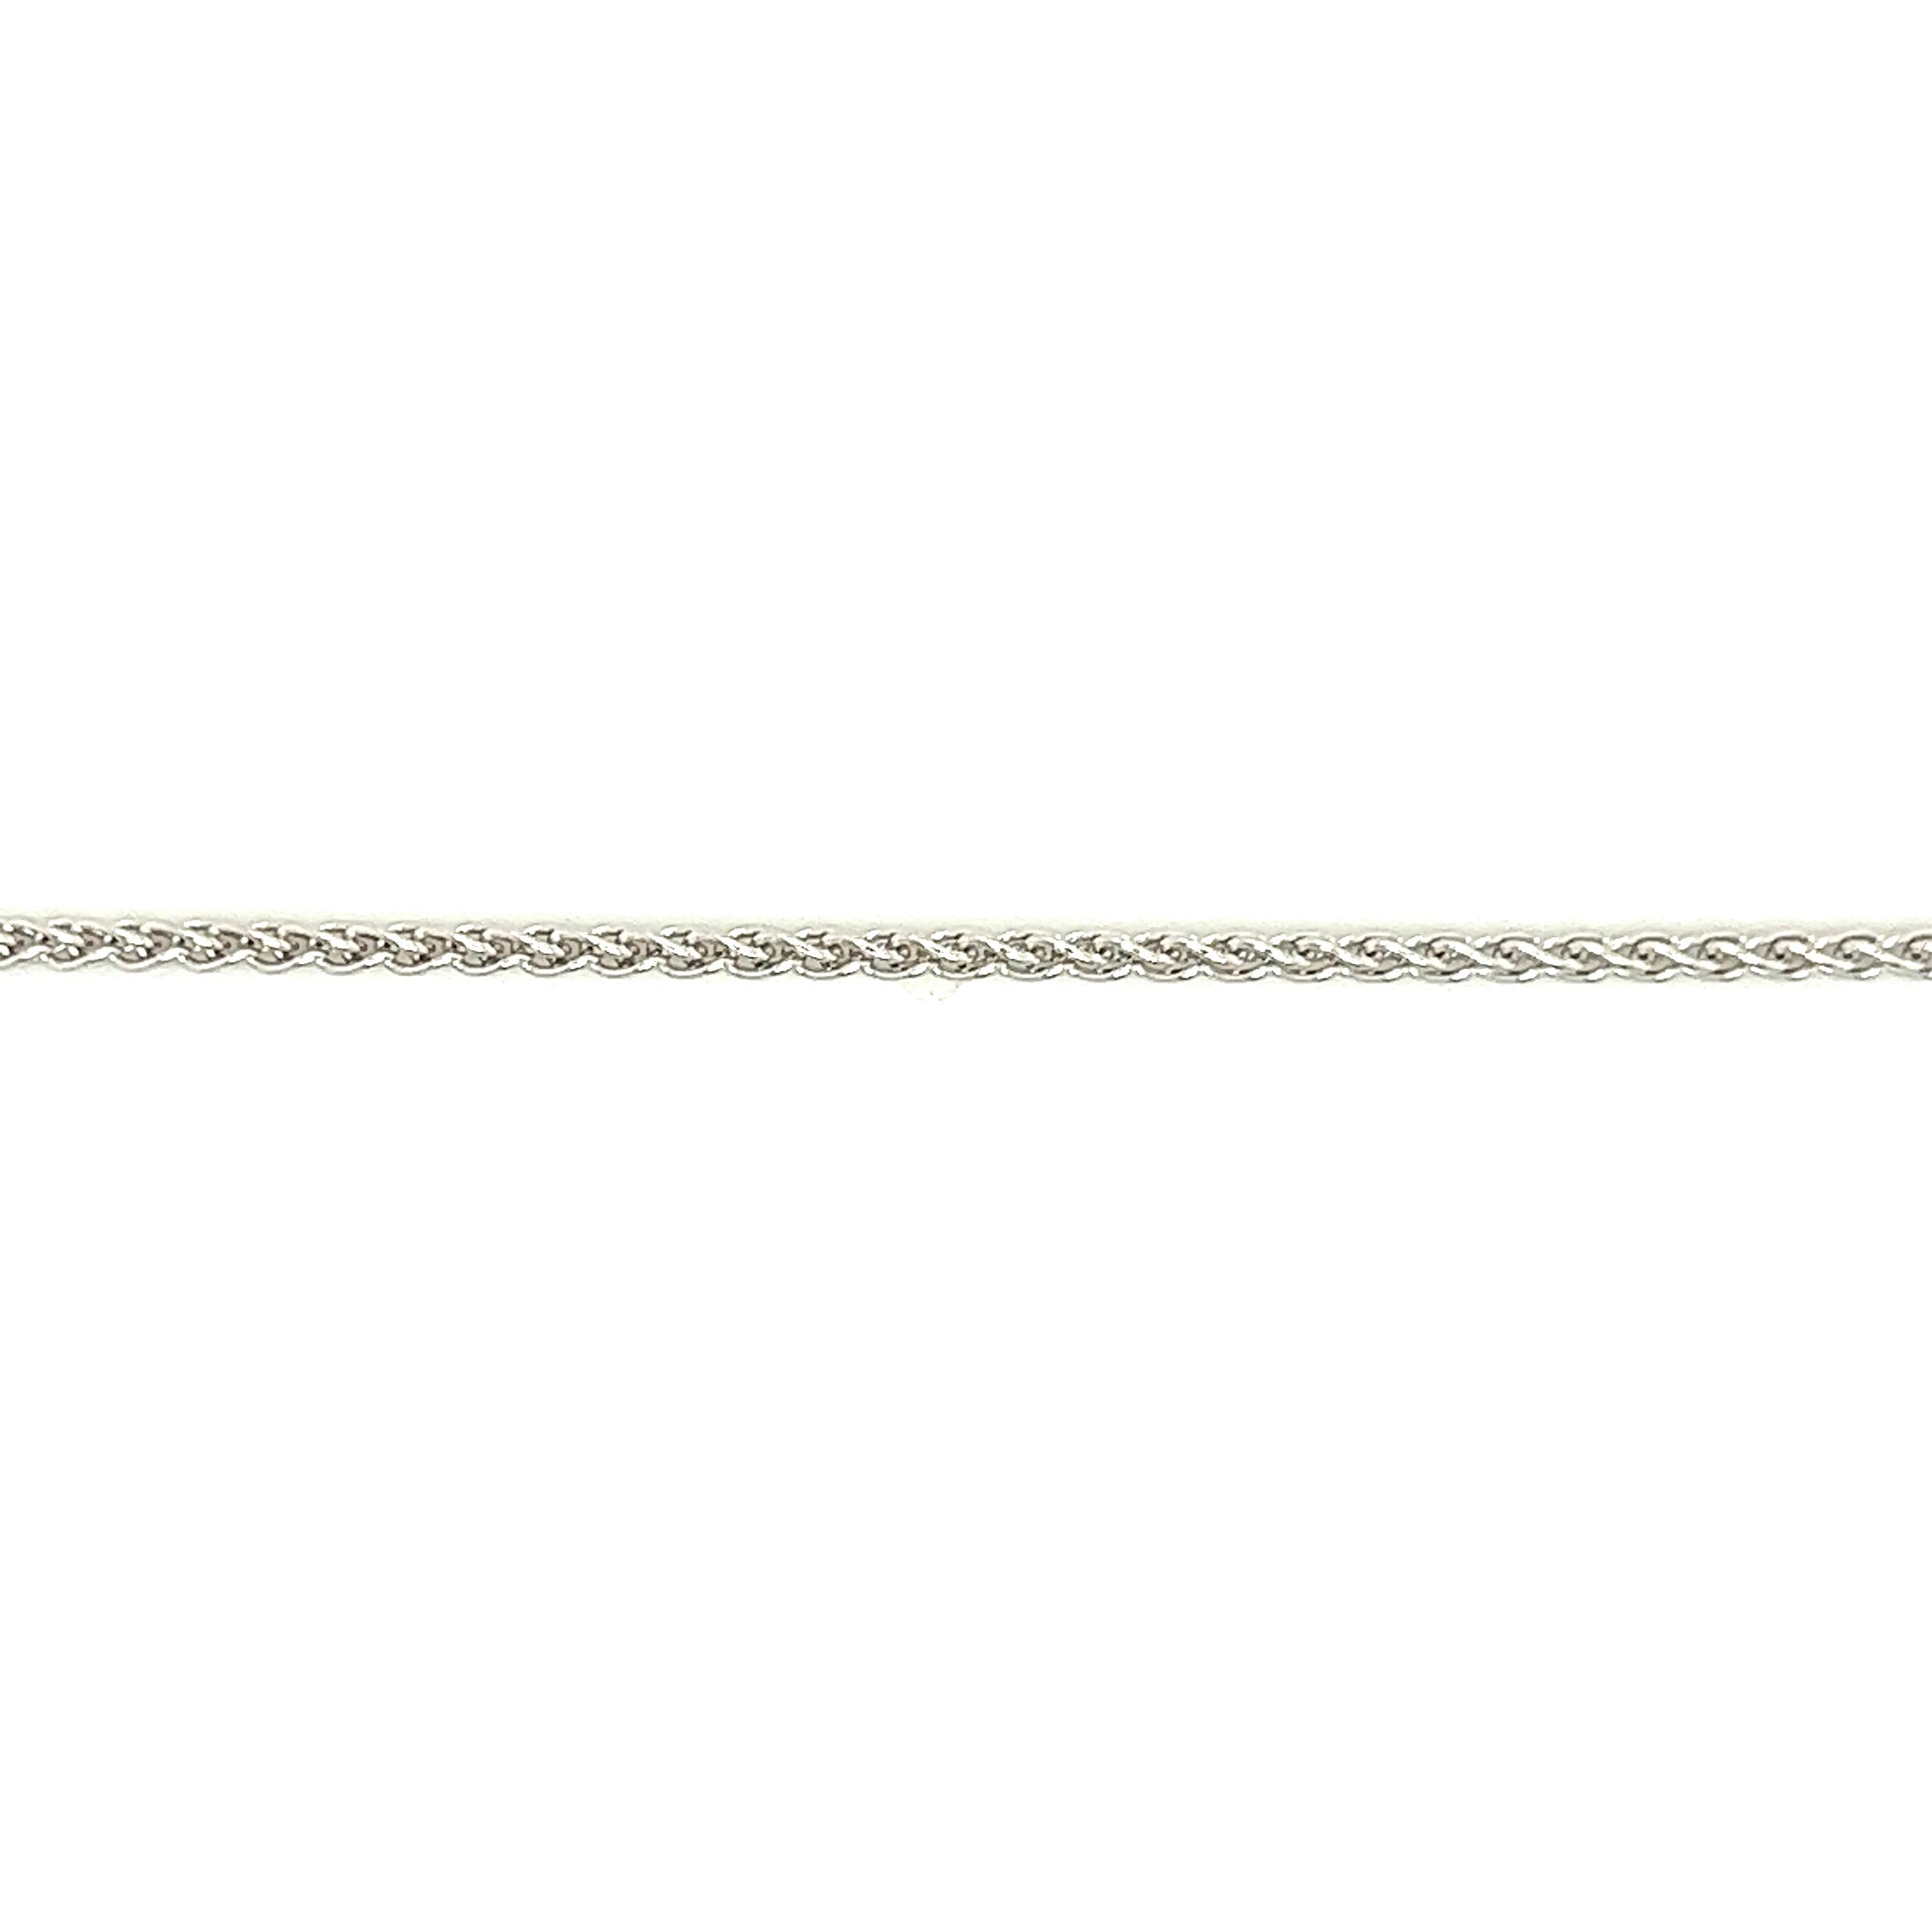 Wheat Chain 1.65mm with 18in of Length in 14K White Gold Chain View